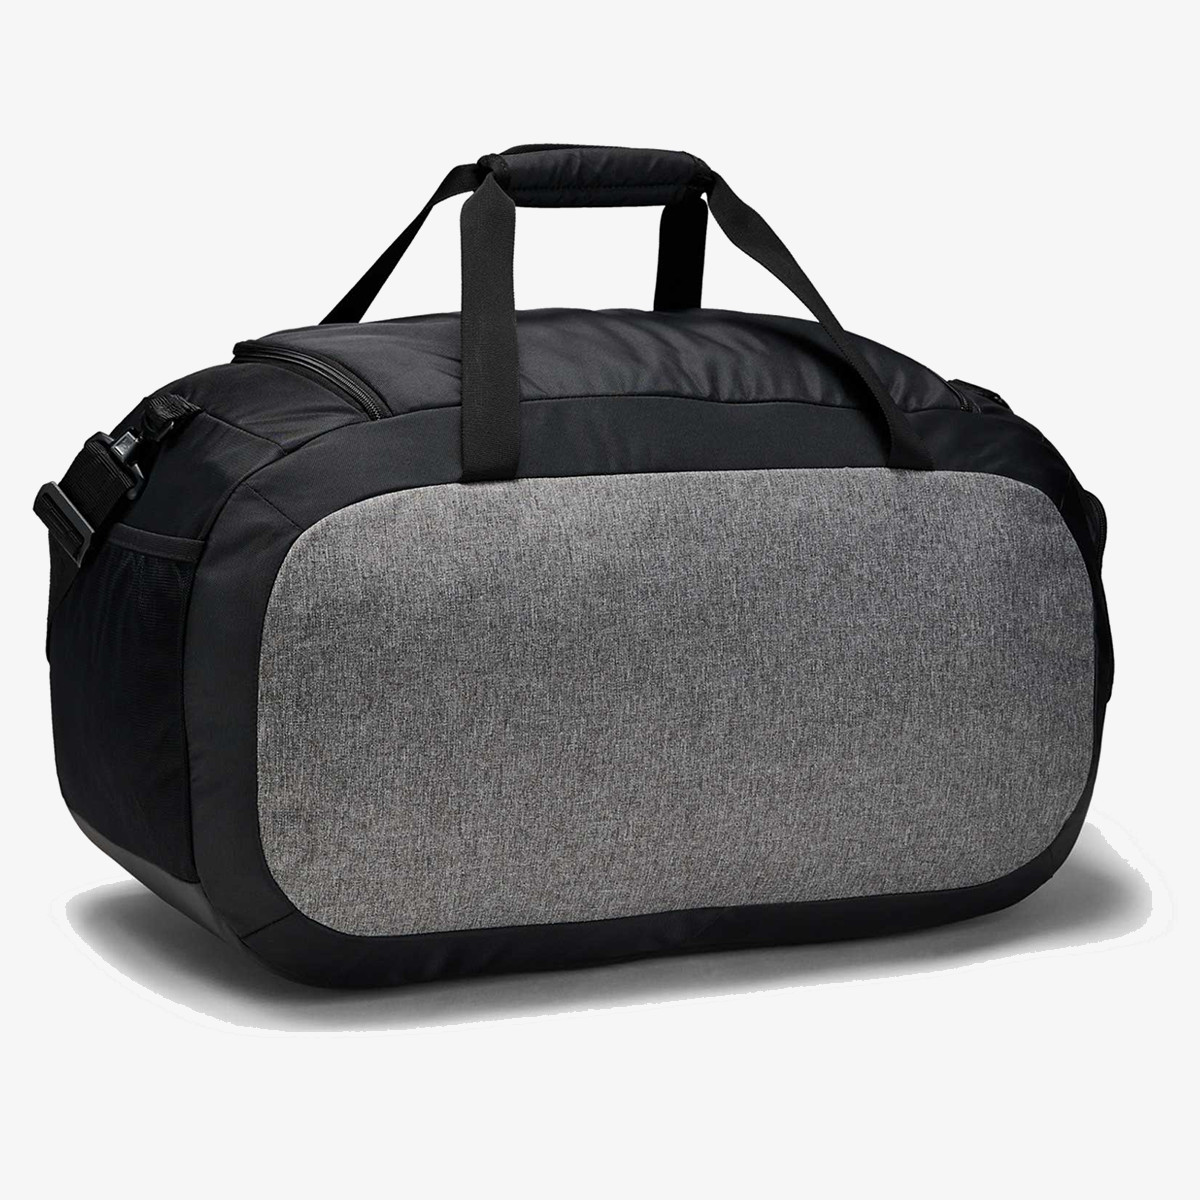 Under Armour Undeniable Duffel 4.0 MD 